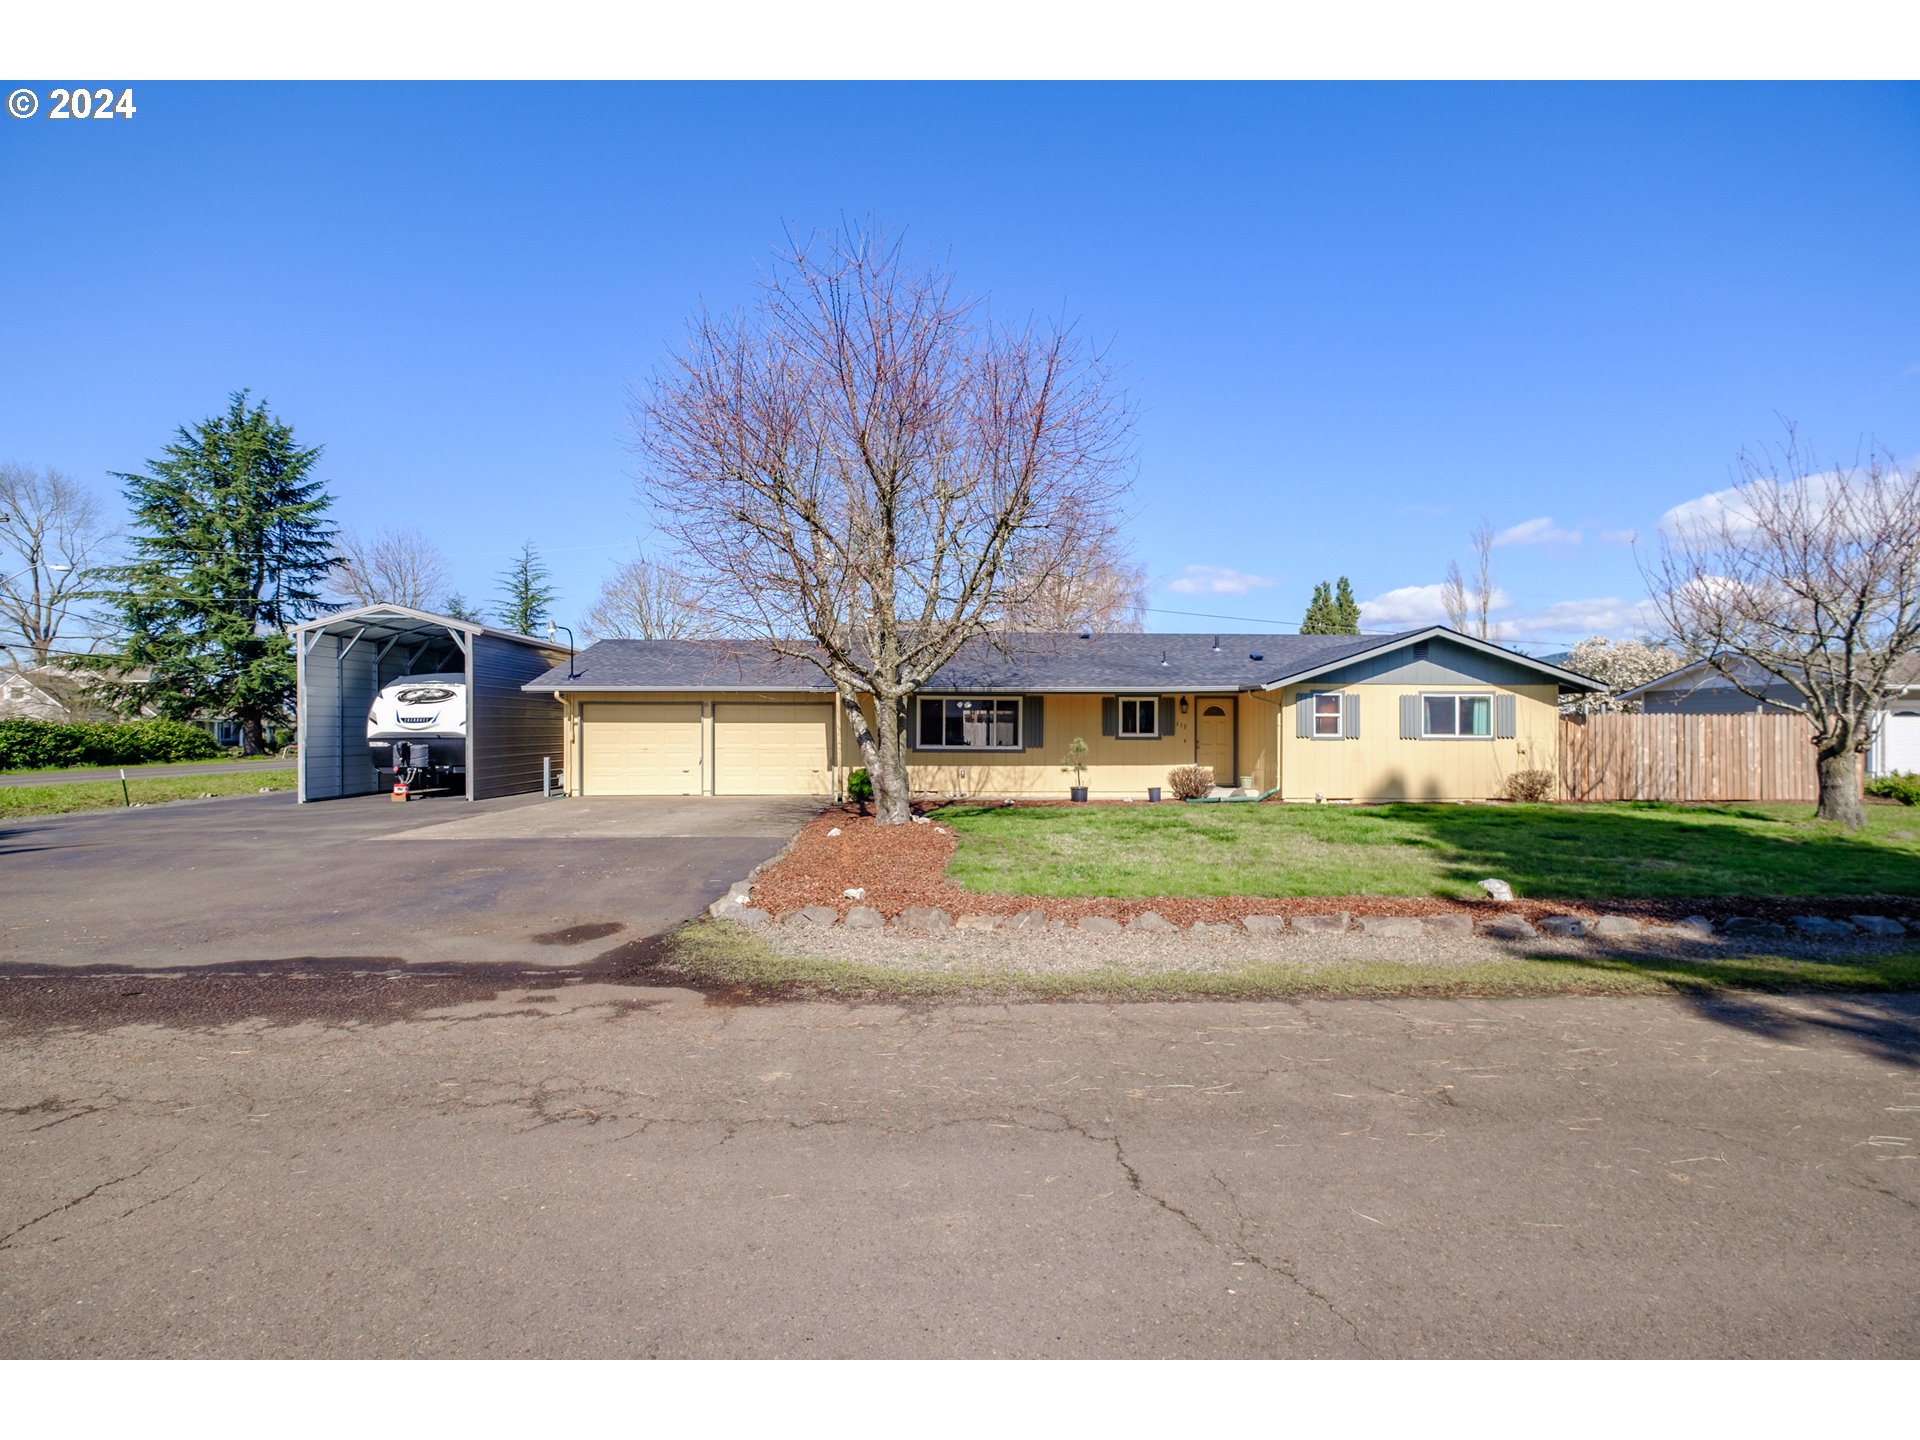 117 WORLEY AVE, Brownsville, OR 